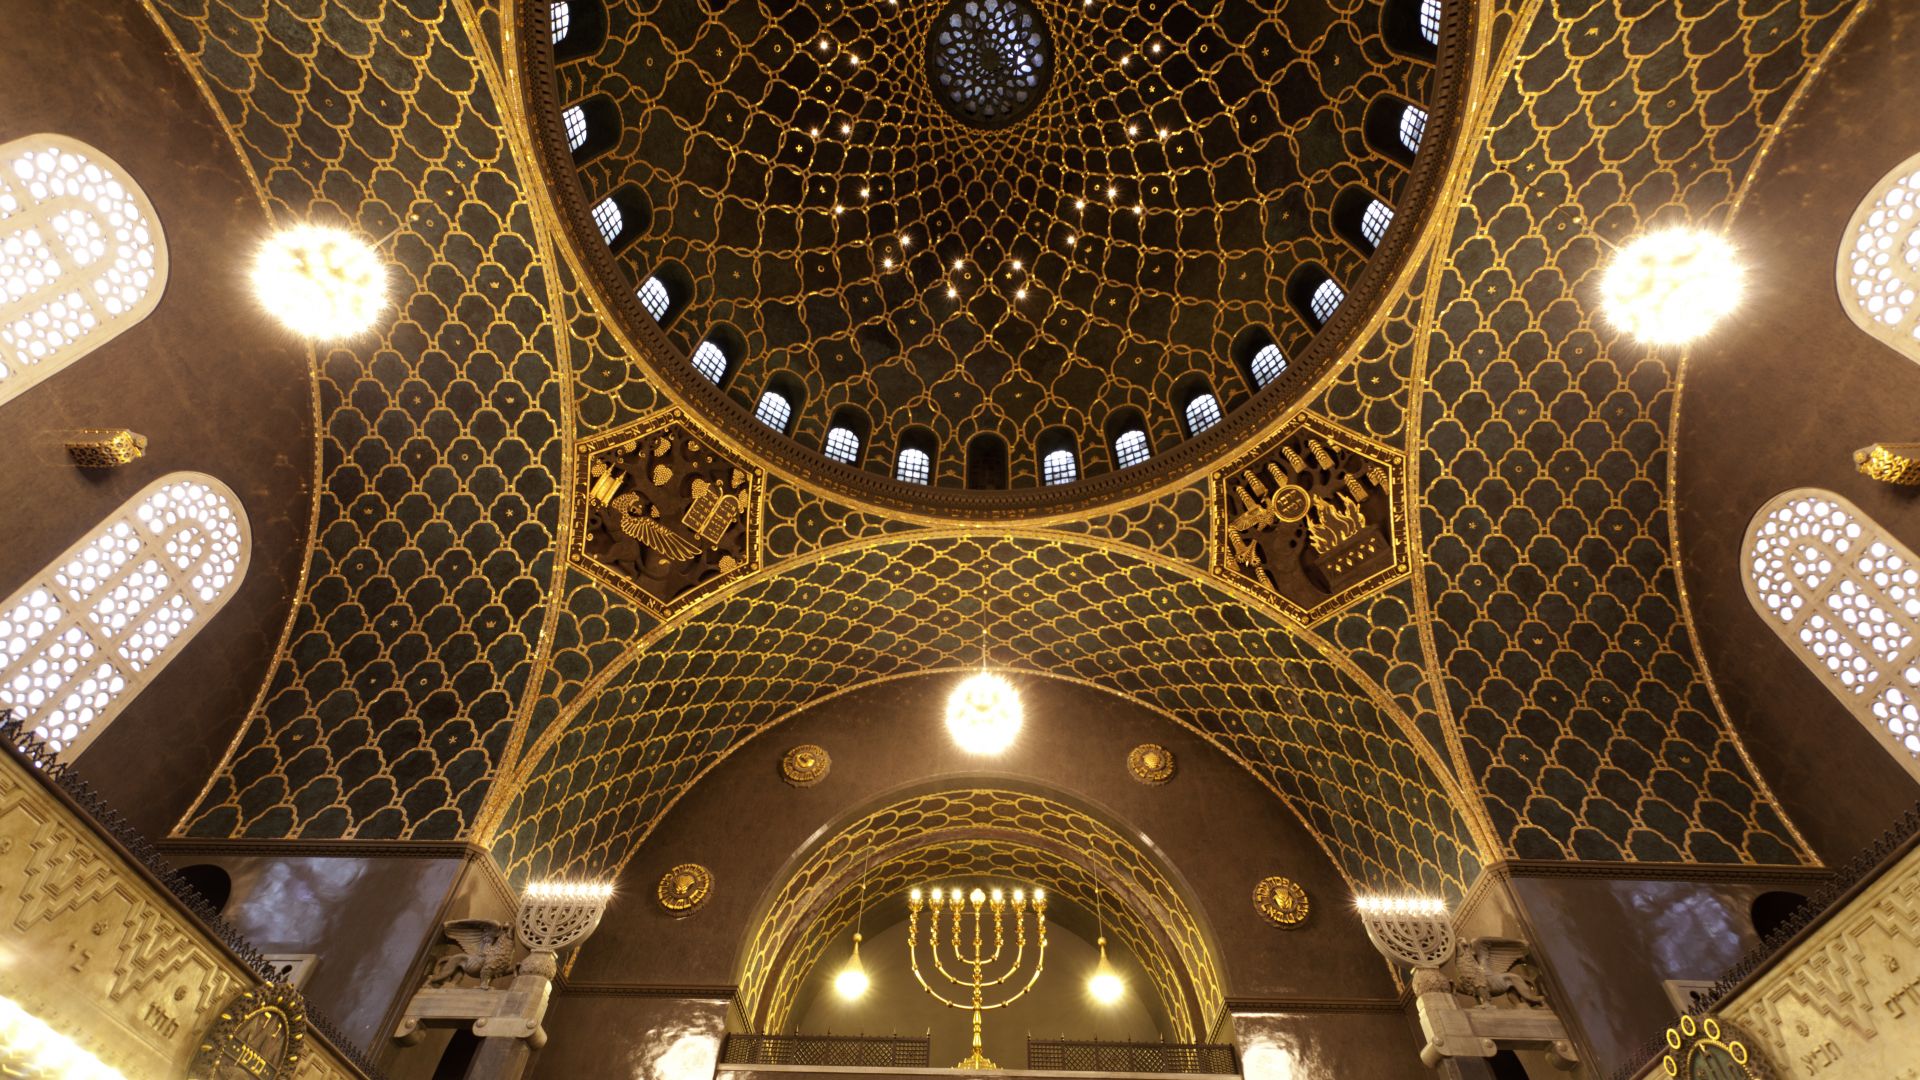 Augsburg: Dome of the Augsburg synagogue, neo-Byzantine architecture